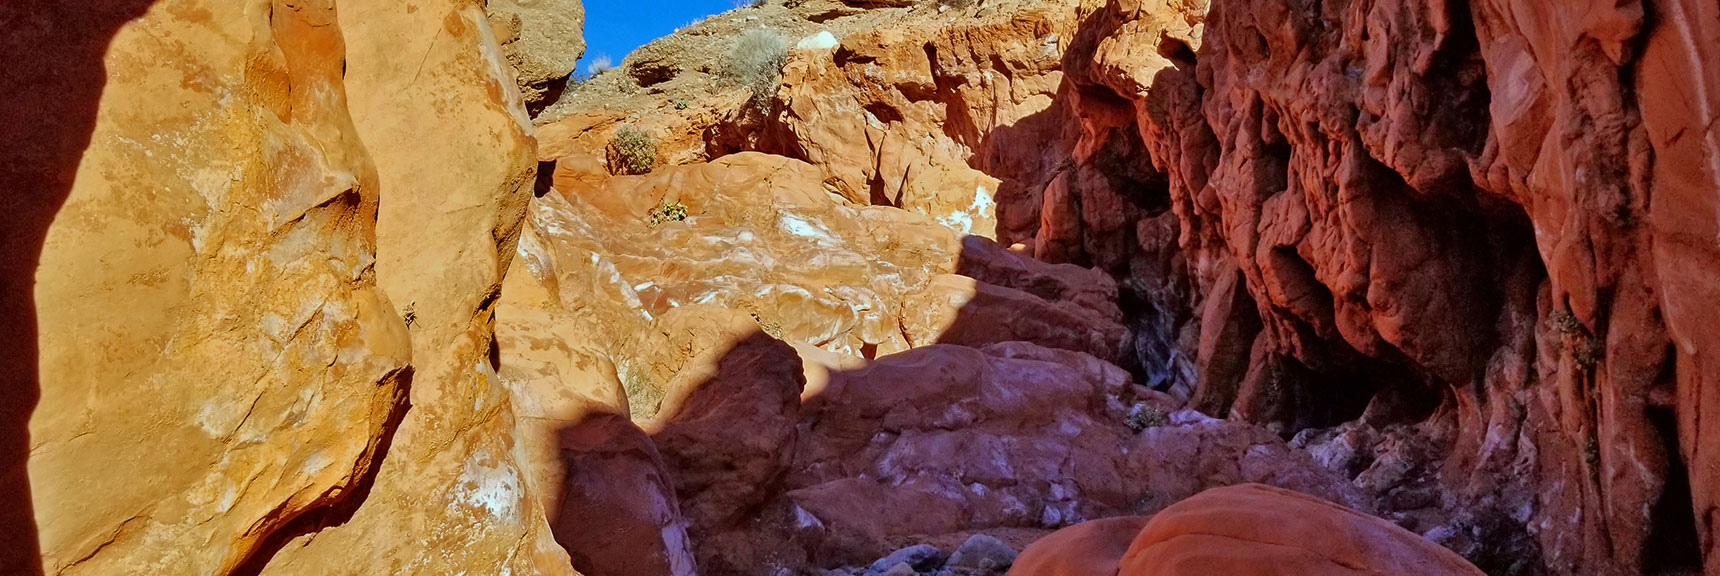 Navigating the Red Rock Canyon on Charlie's Spring Trail, Valley of Fire State Park, Nevada